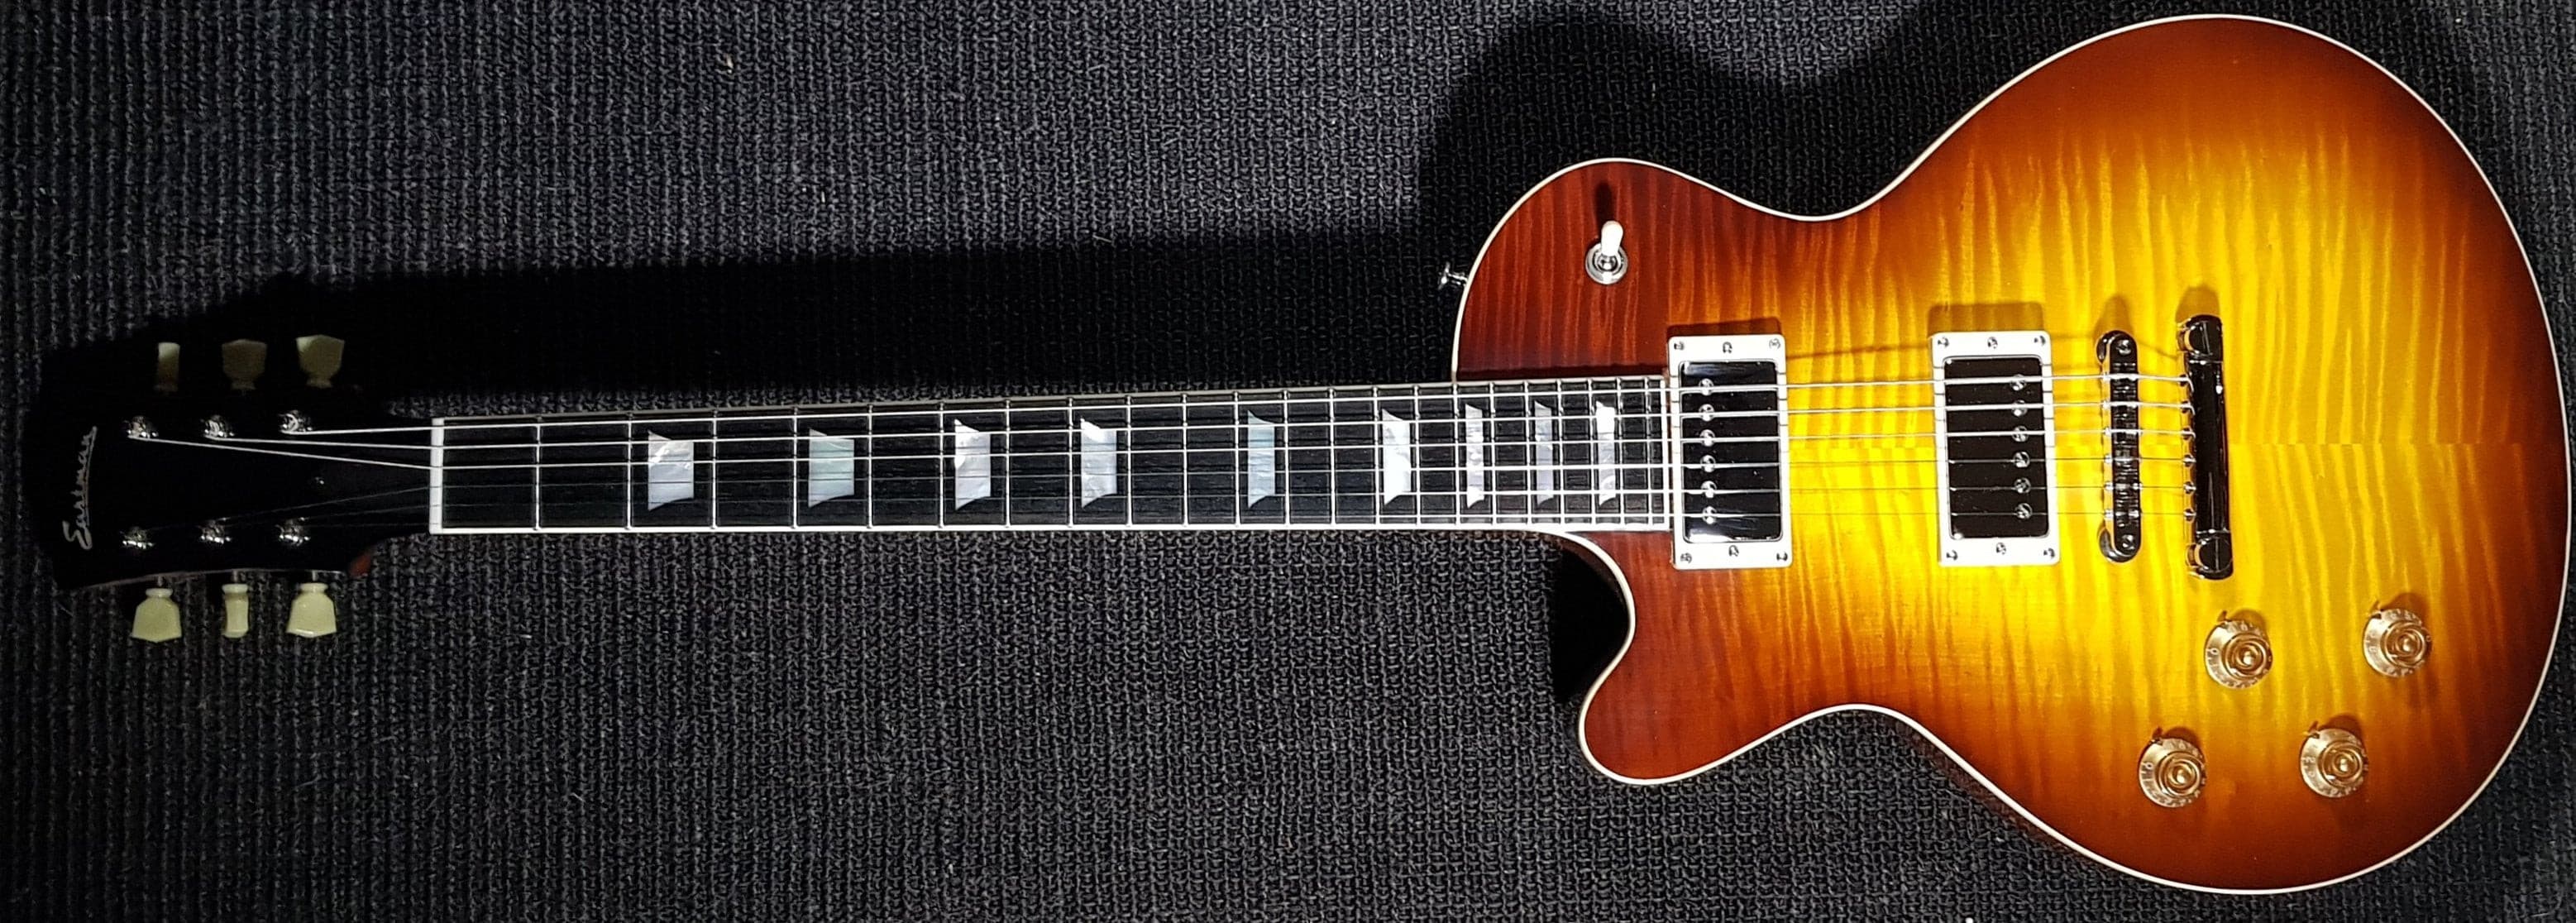 Eastman SB59 GB Left Handed Solid Body Electric Guitar, Electric Guitar for sale at Richards Guitars.